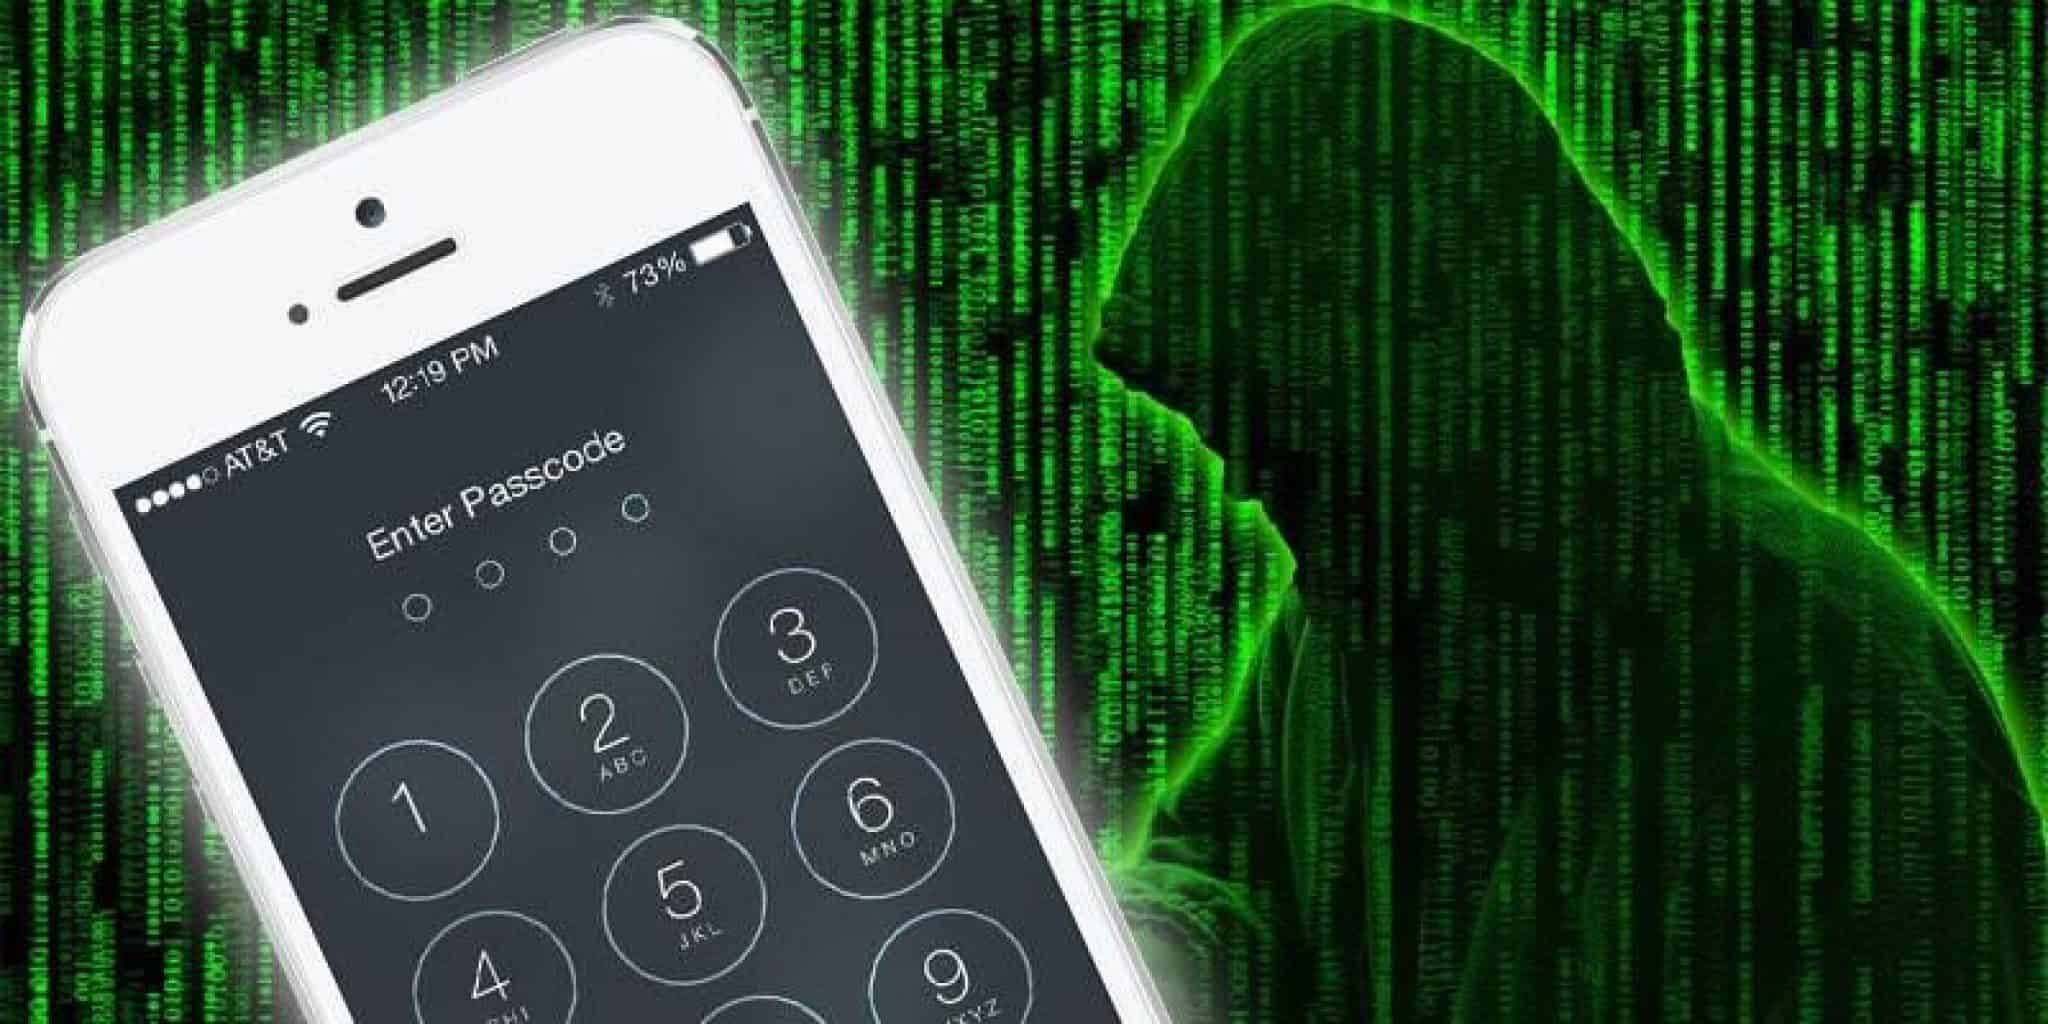 iphone hacked remotely wifispoof